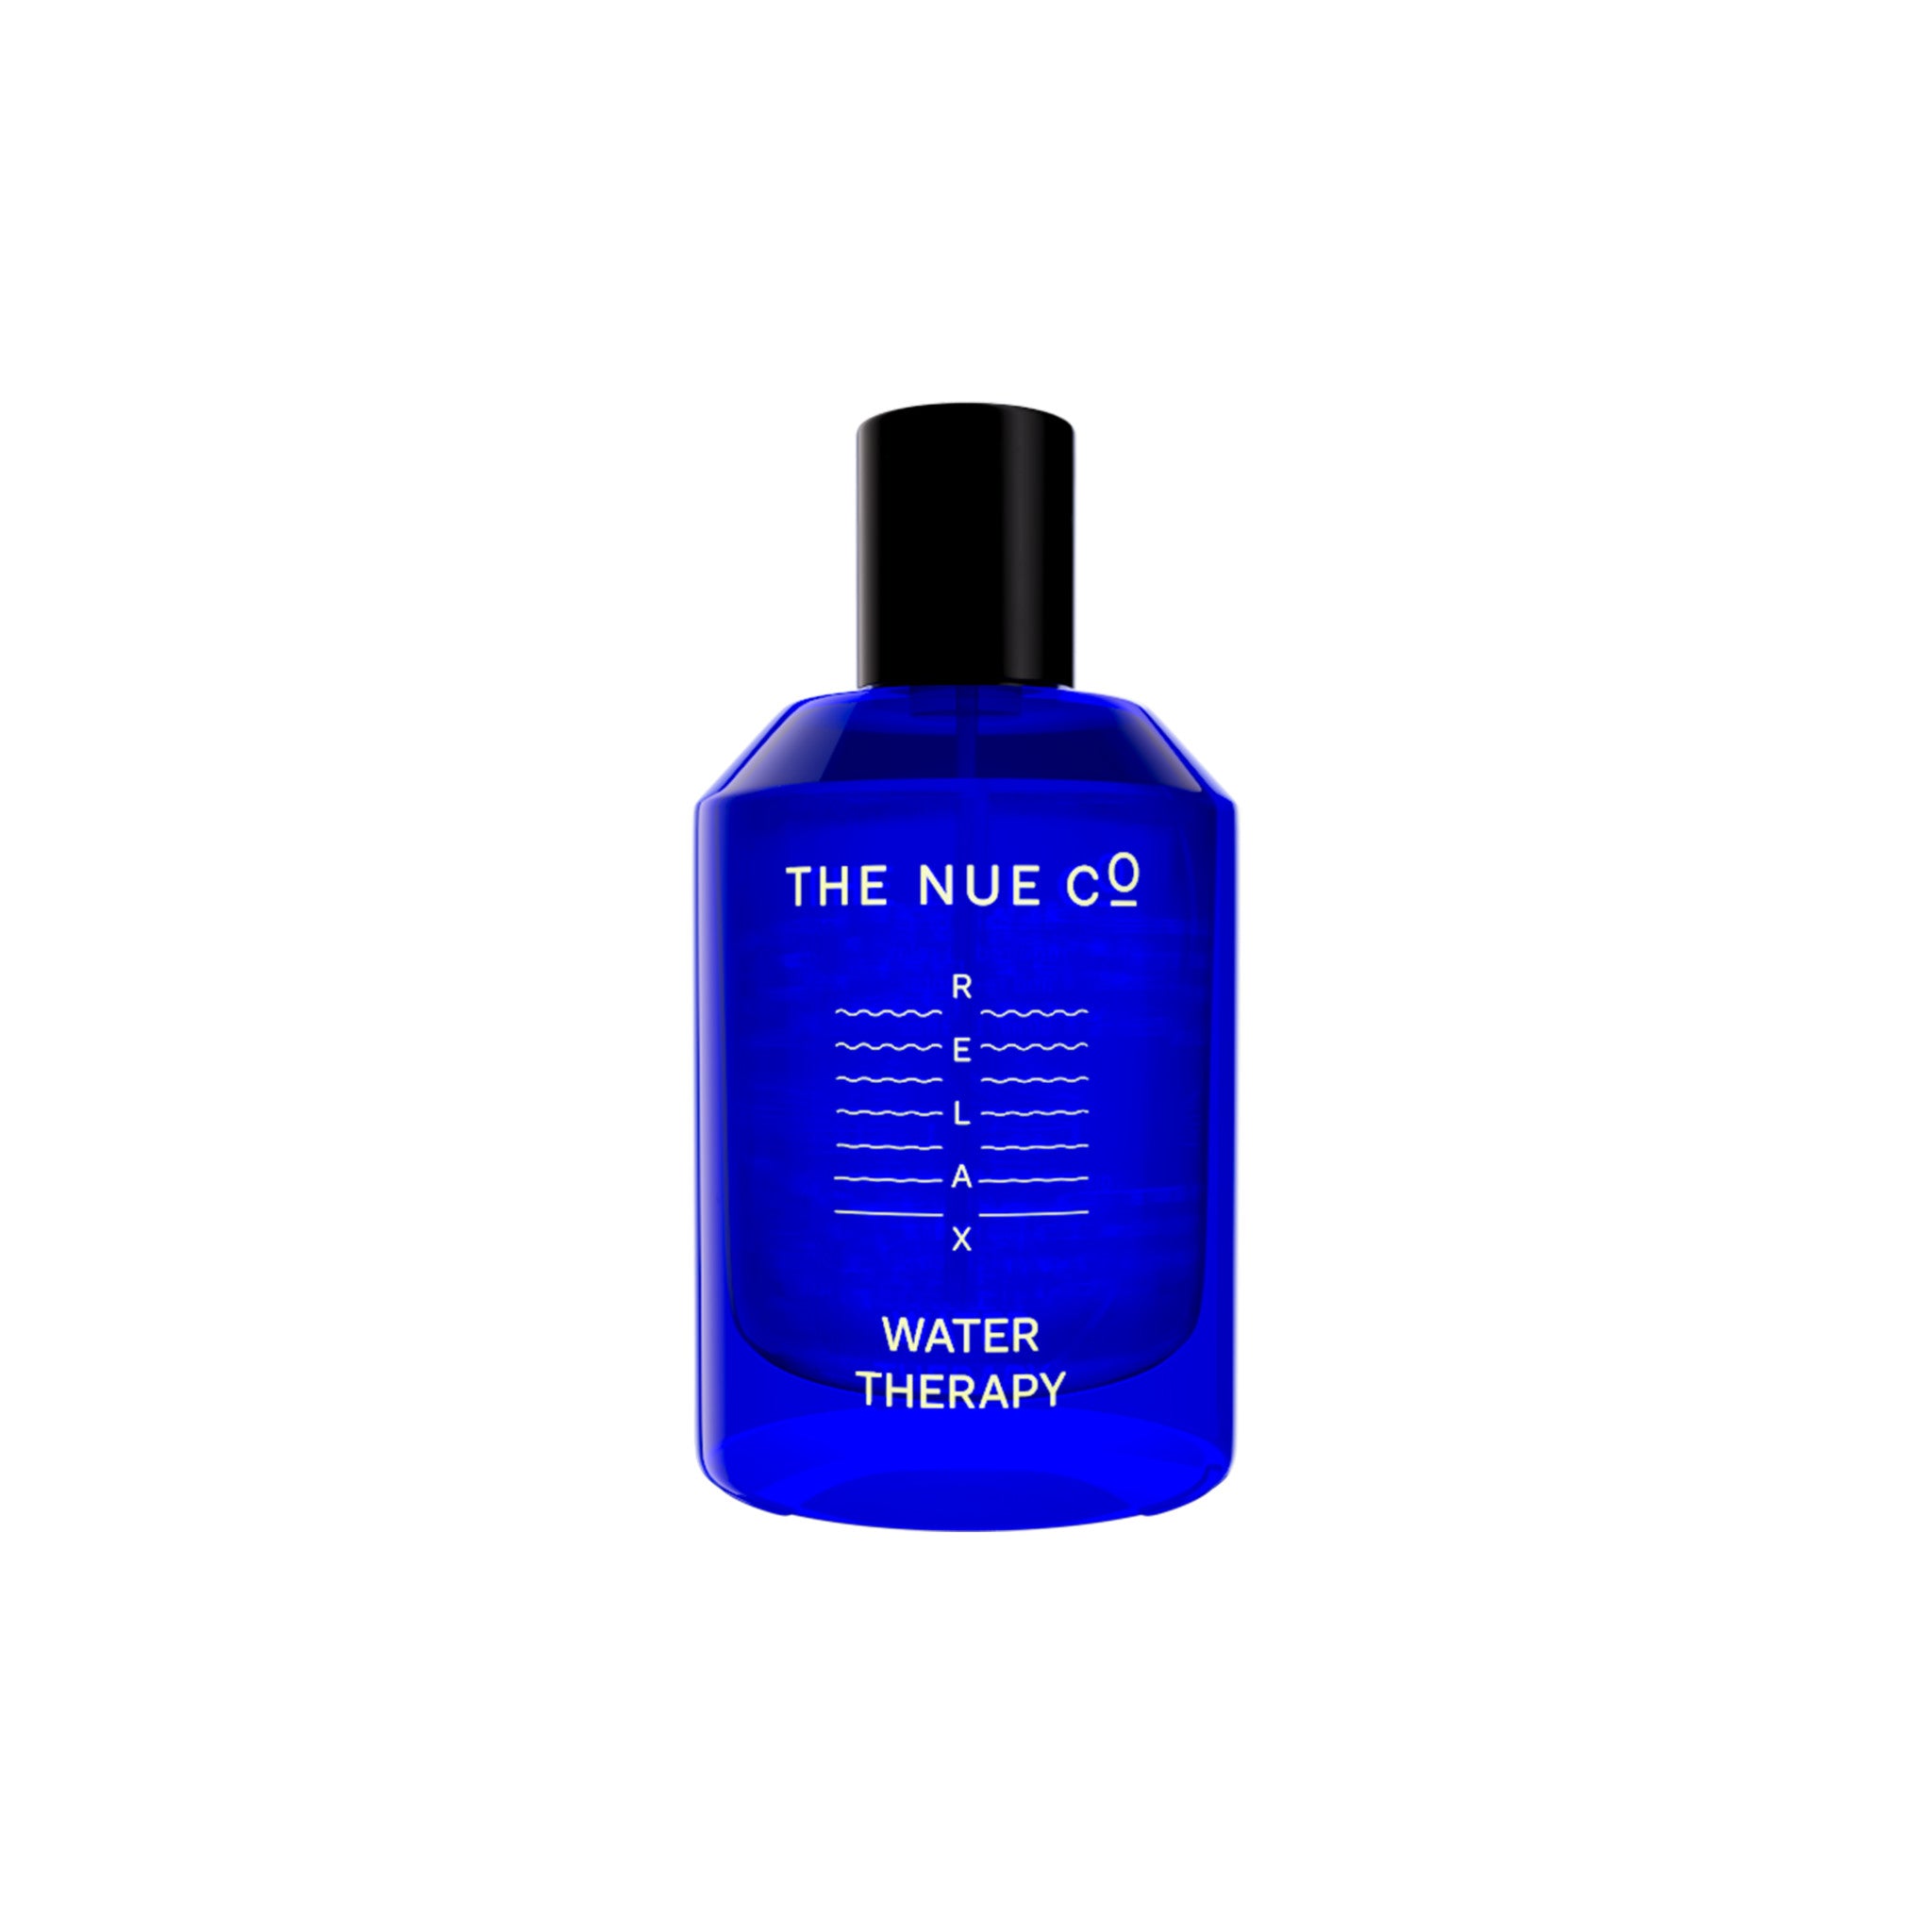 The Nue Co Water Therapy main image.